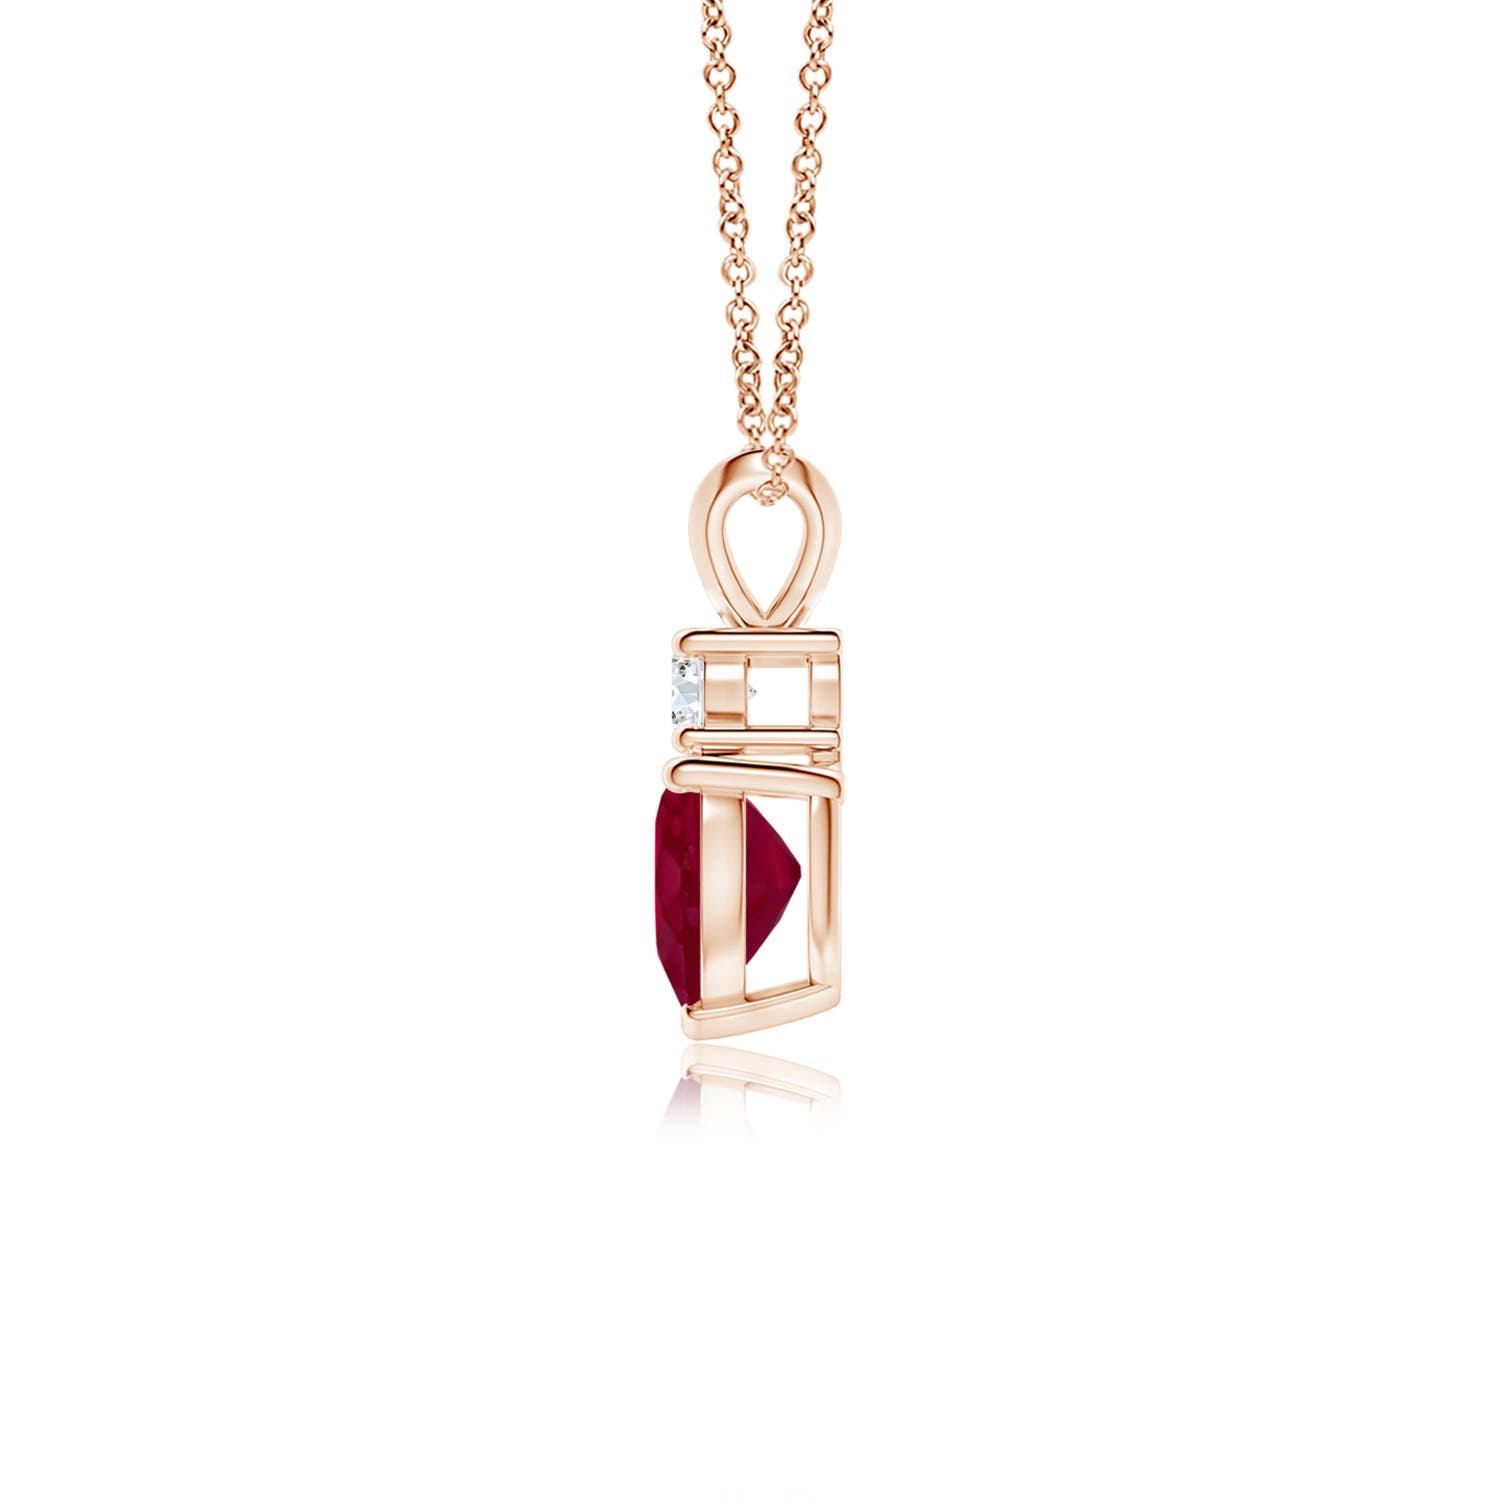 A - Ruby / 0.88 CT / 14 KT Rose Gold